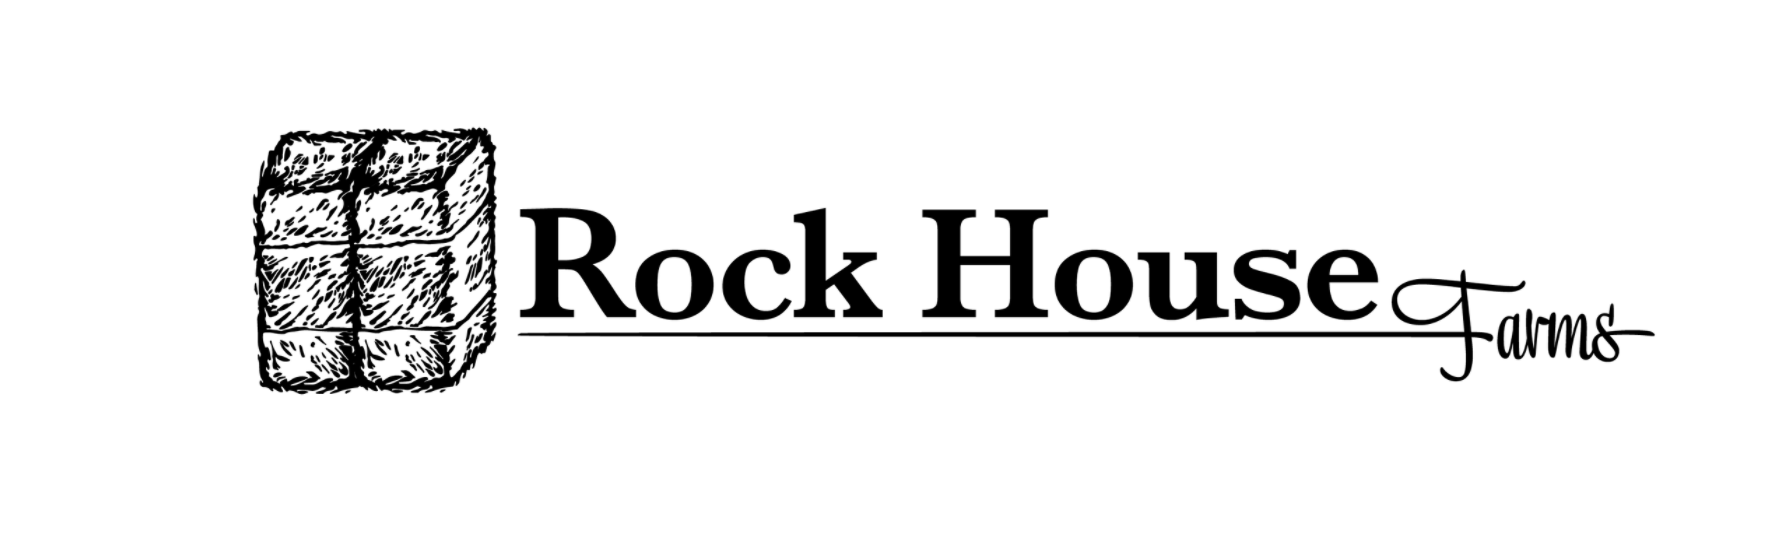 Helping Rock House Farms Create the Best Ag Logo in Arizona